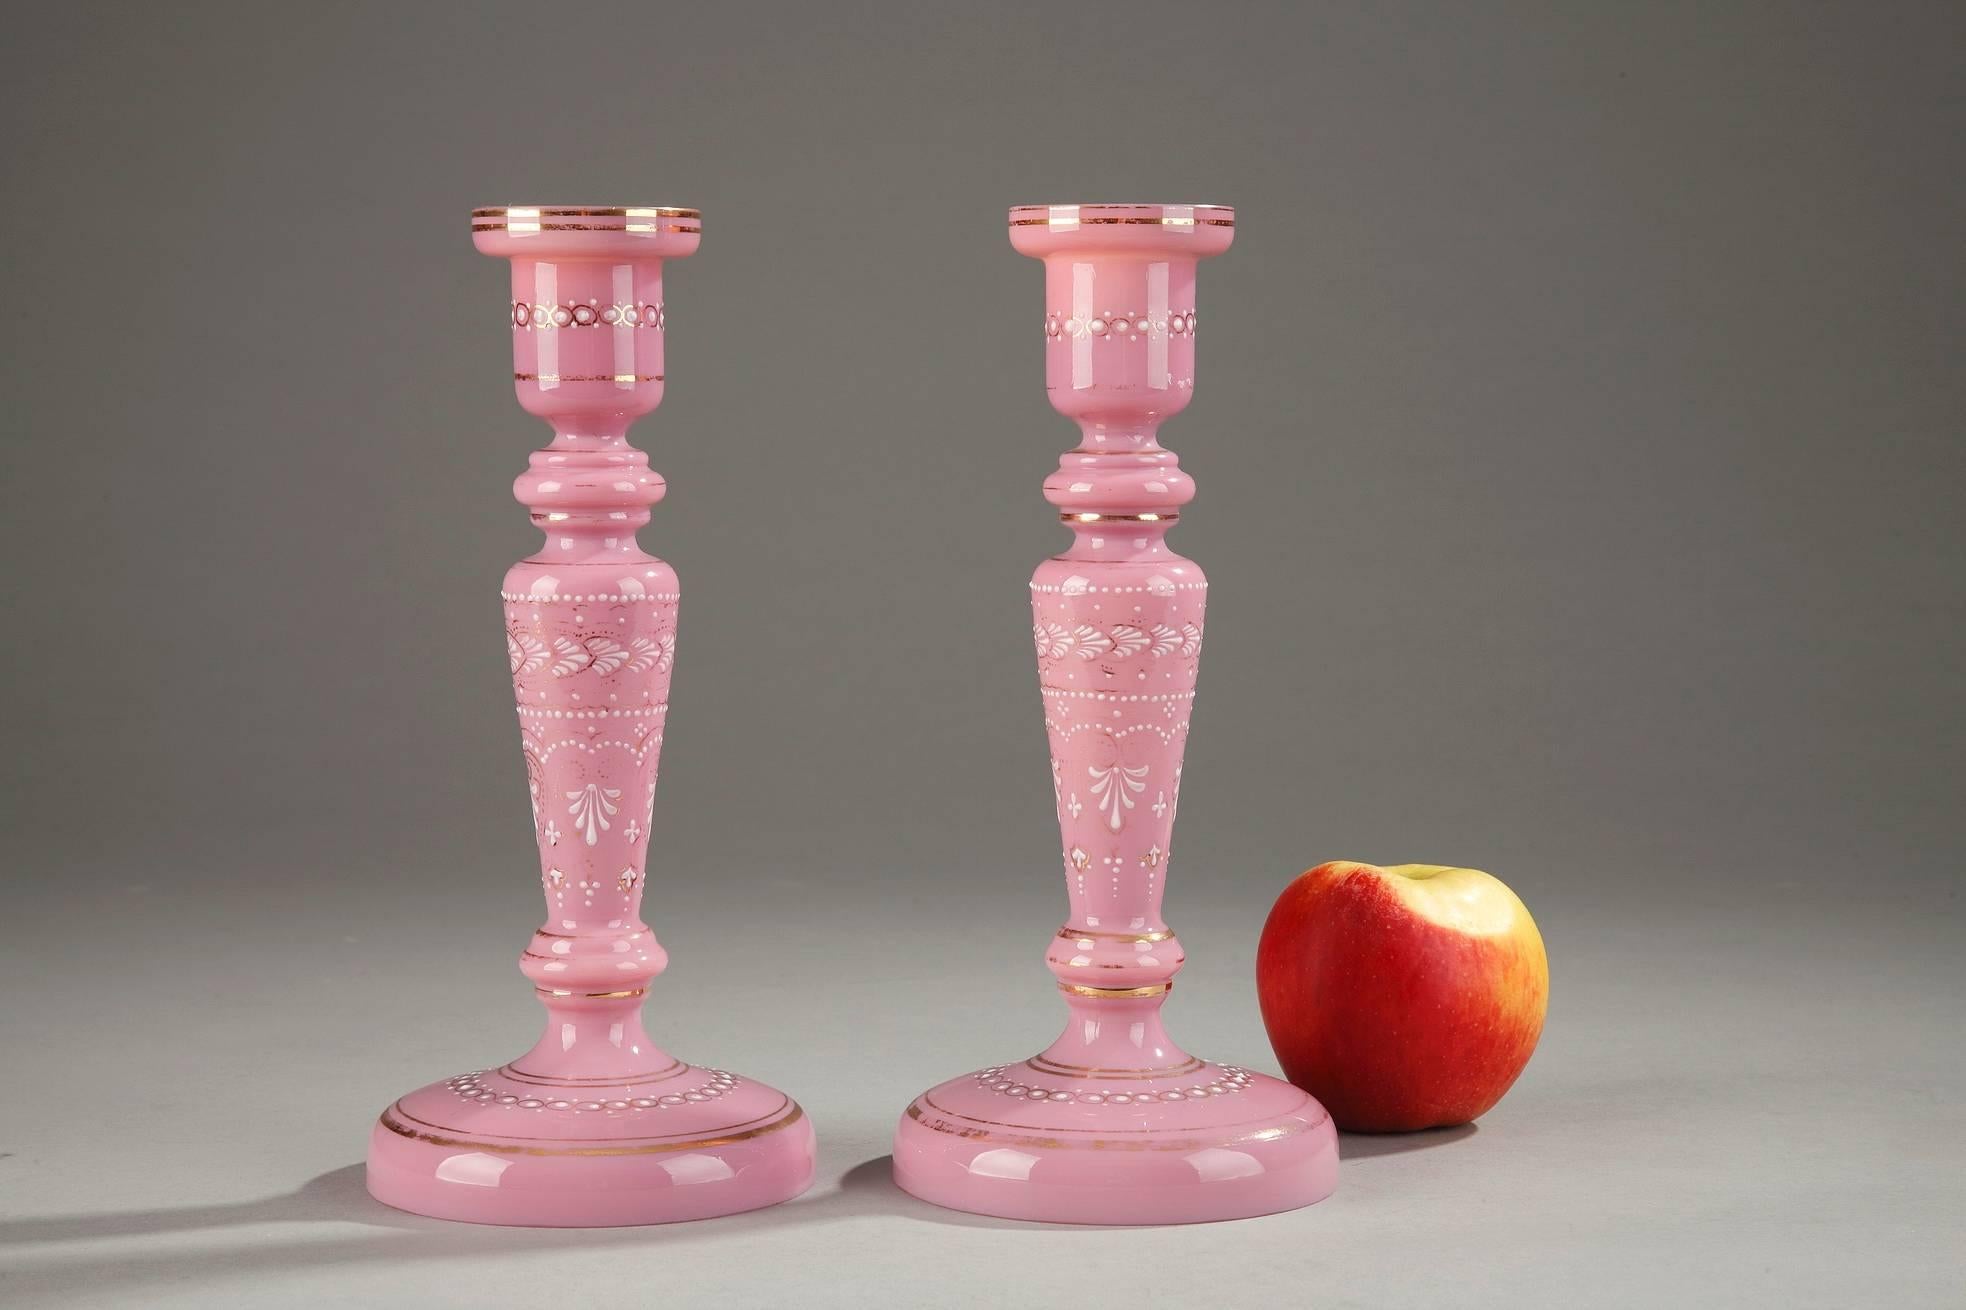 Pair of pink opaline candlesticks featuring white enamel palmettes, small dots and floral motifs. Gold bands highlight the enamel as well as the socket, shaft and base of the candlesticks. This ensemble gives the impression of a successful imitation